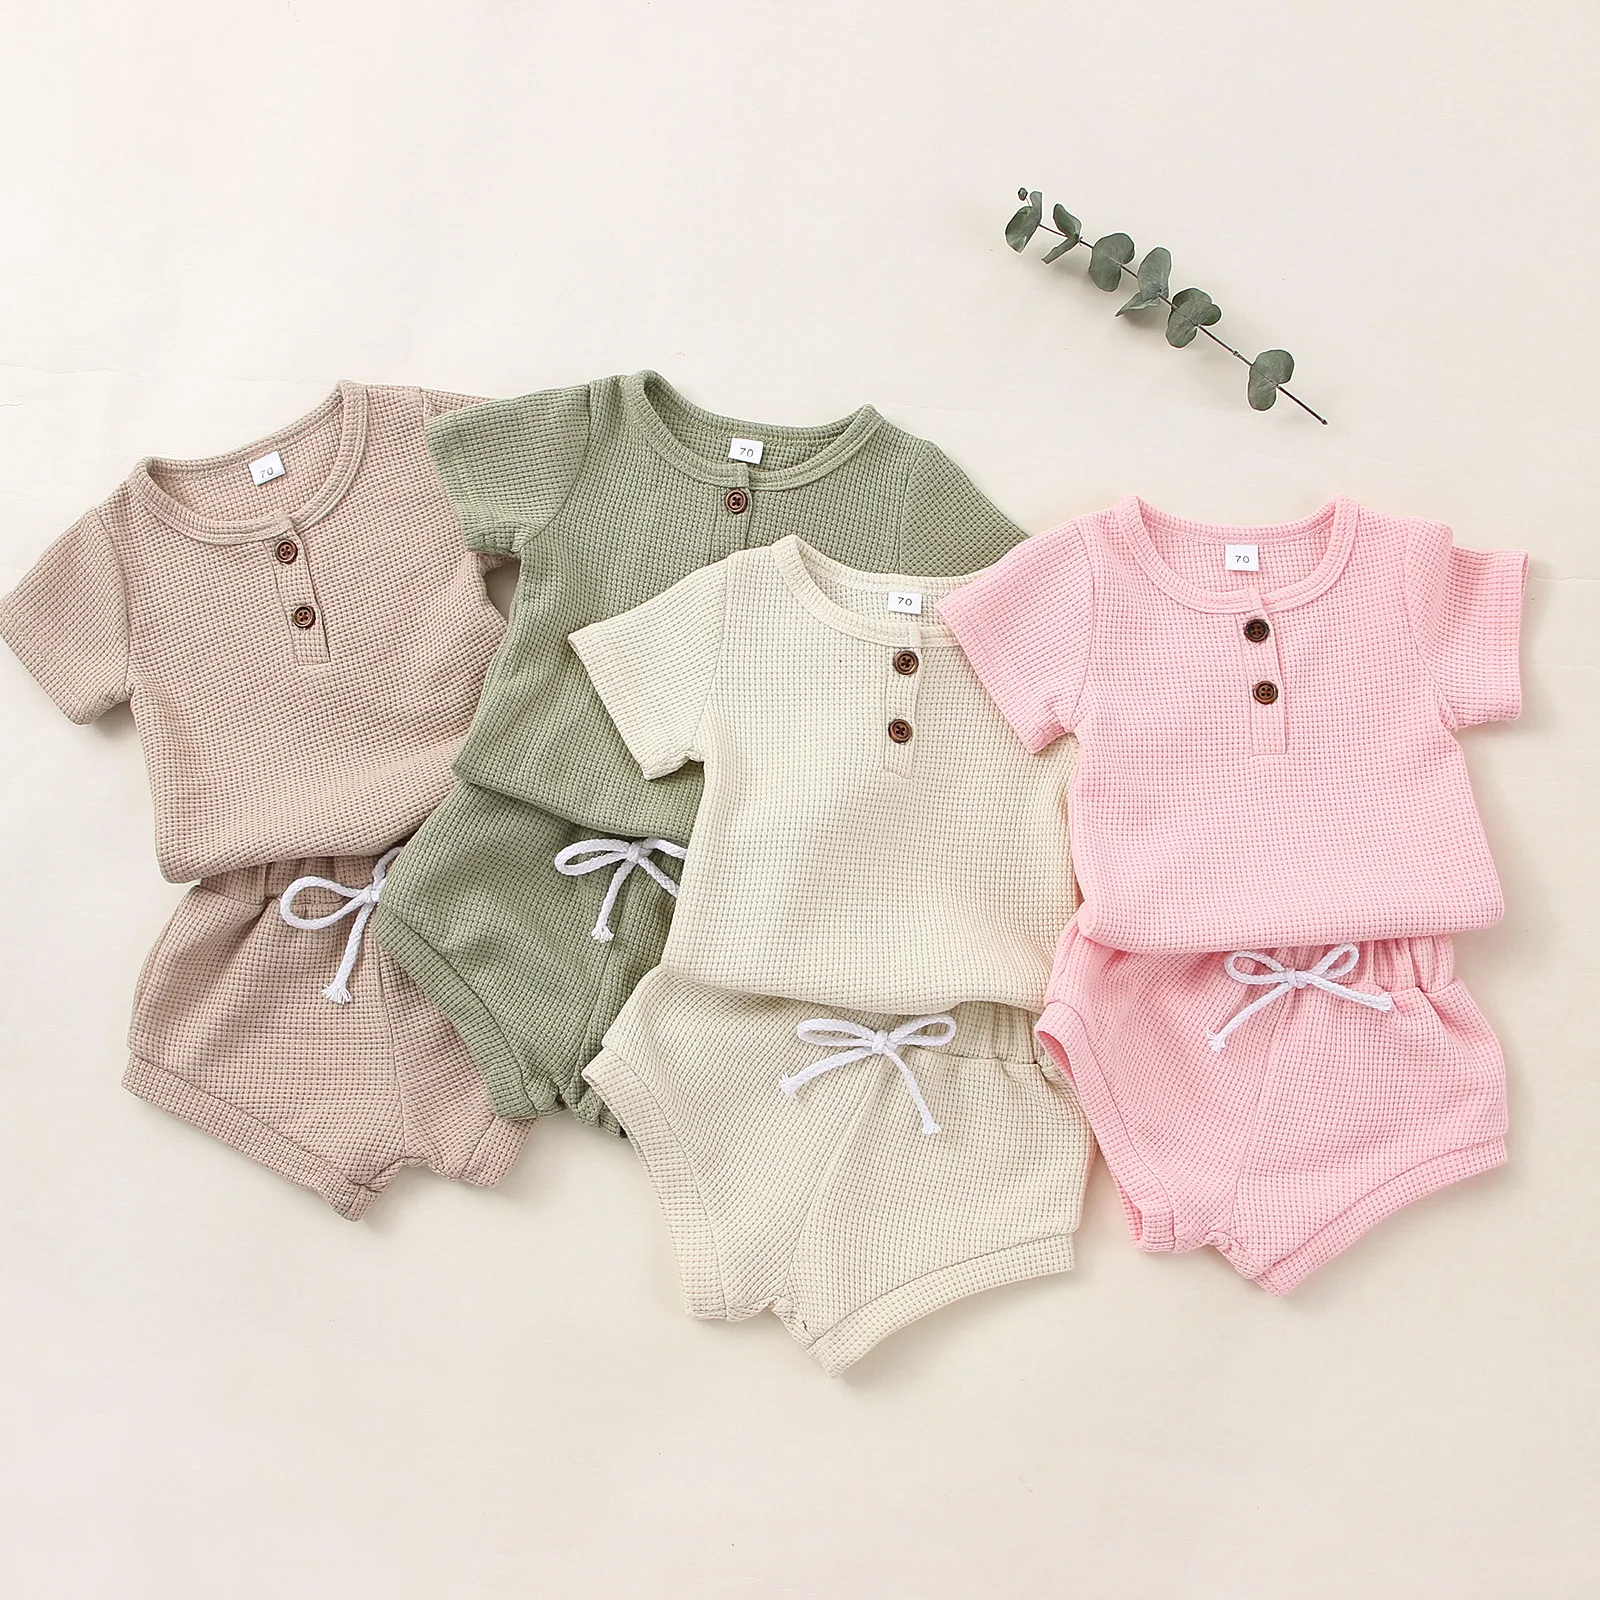 baby outfit matching set Infant Baby Girls Boys 2PCS Pants Suit, Short Sleeve Plain Buttons O-Neck T-Shirt, High Waist Tie-Up Triangle Short Pants Baby Clothing Set discount